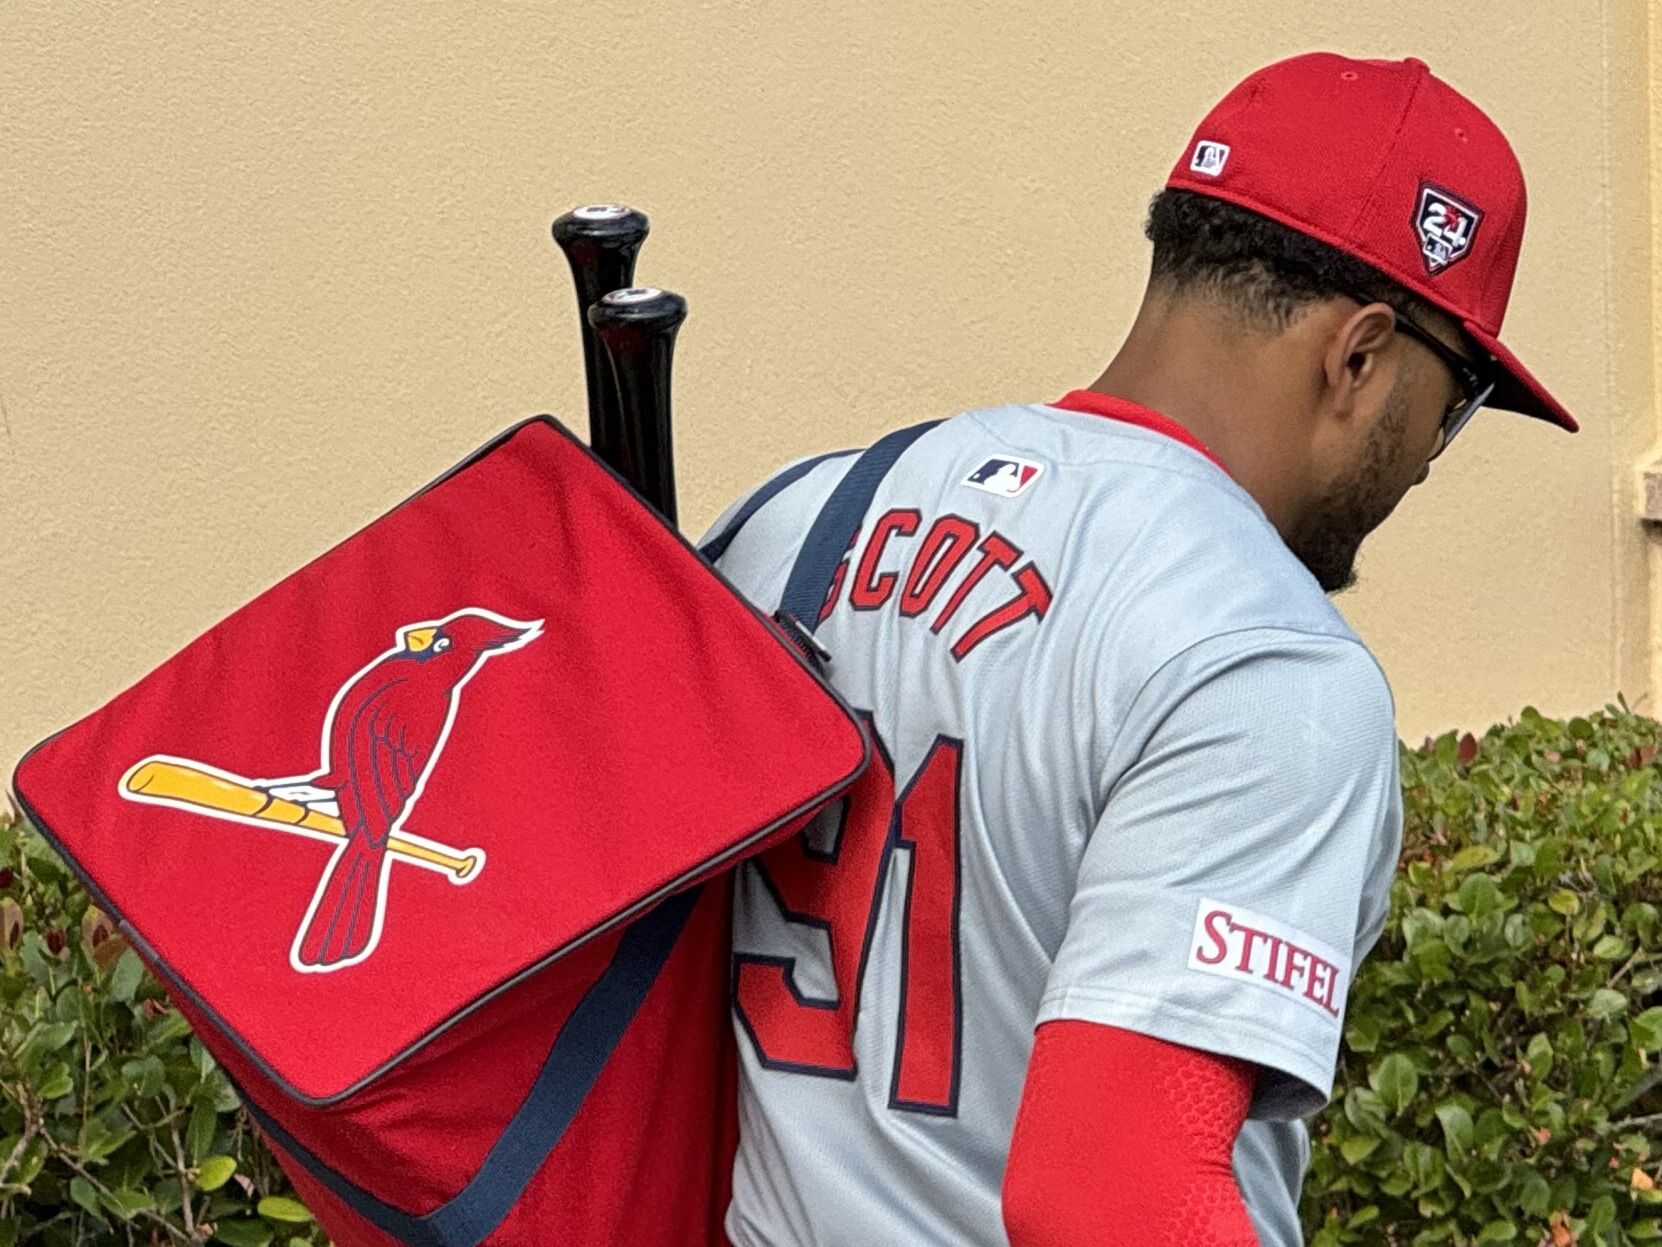 Why are Cardinals wearing grays? Uniform delays, not concerns for